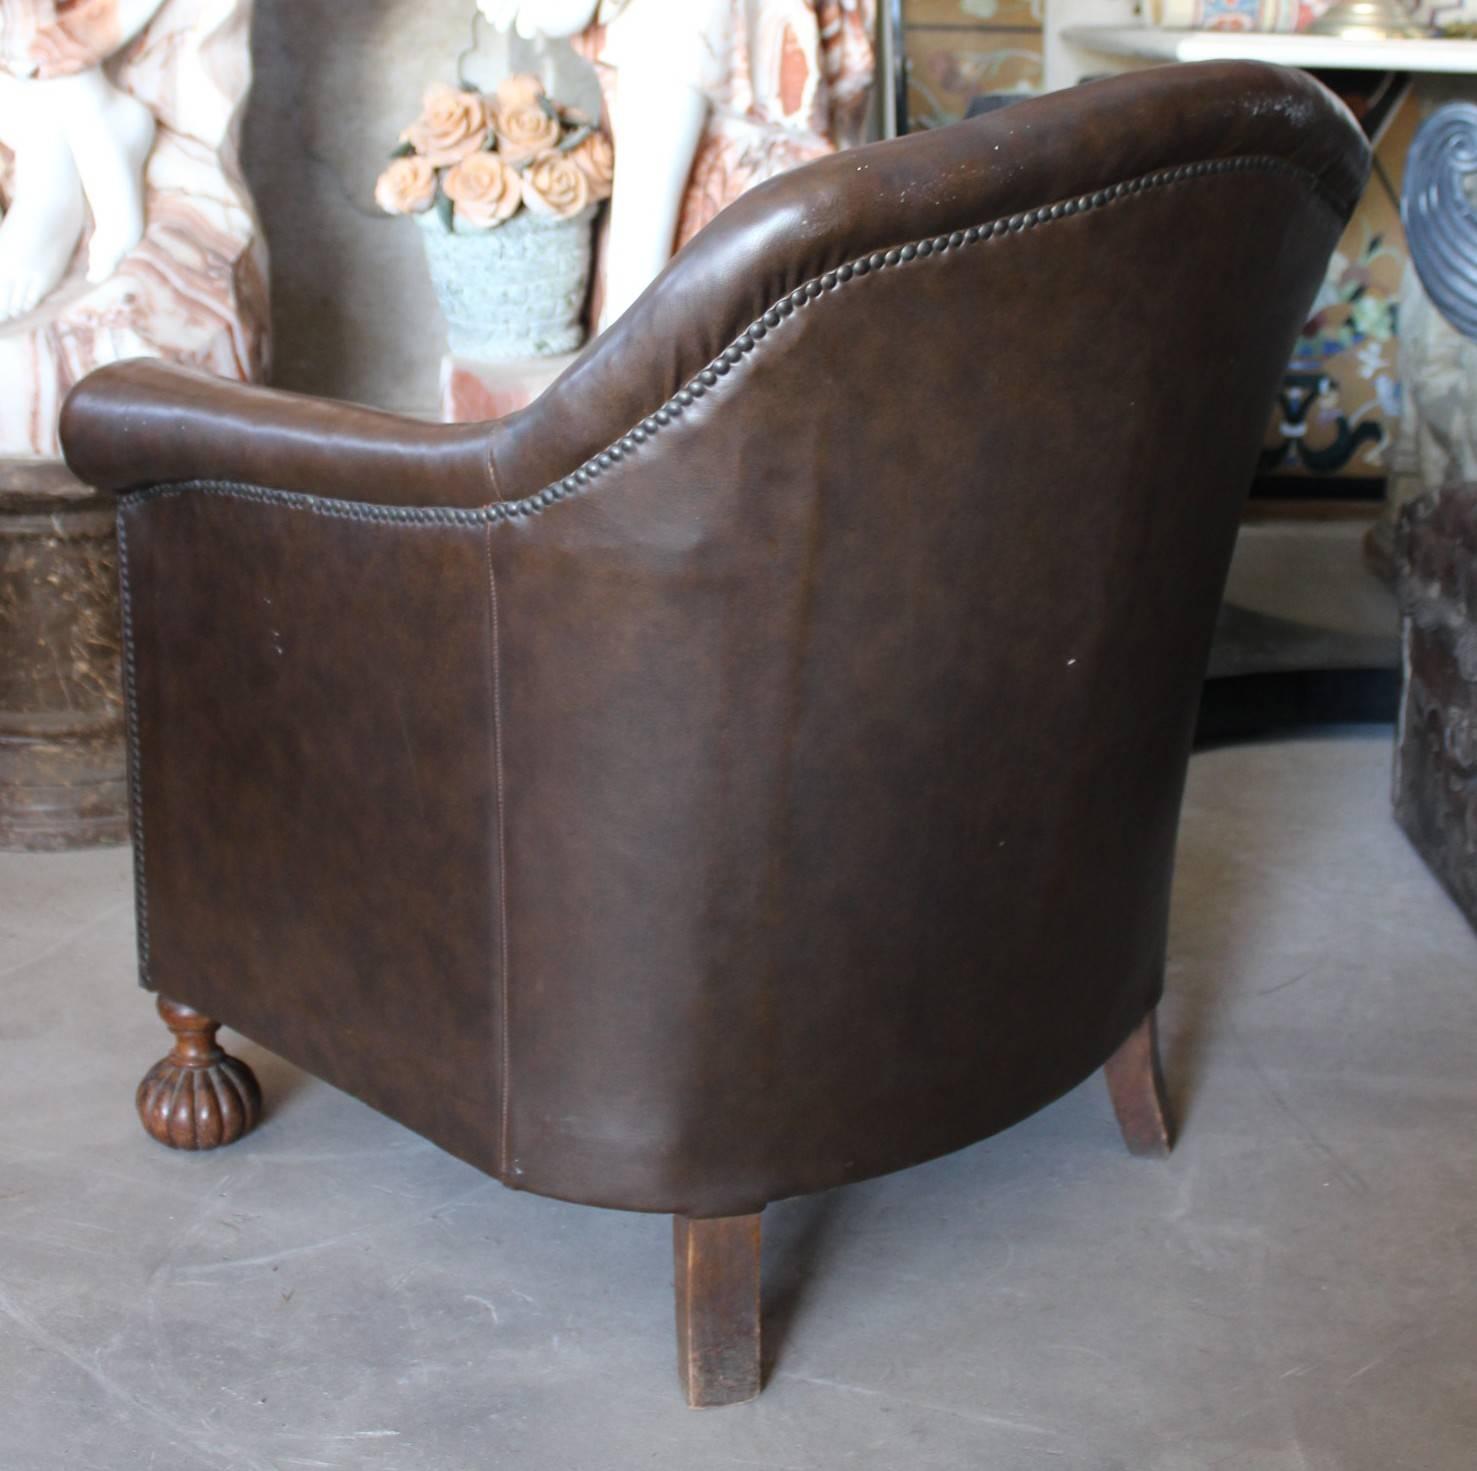 20th Century 1950s English Leather Armchair with Carved Wooden Legs